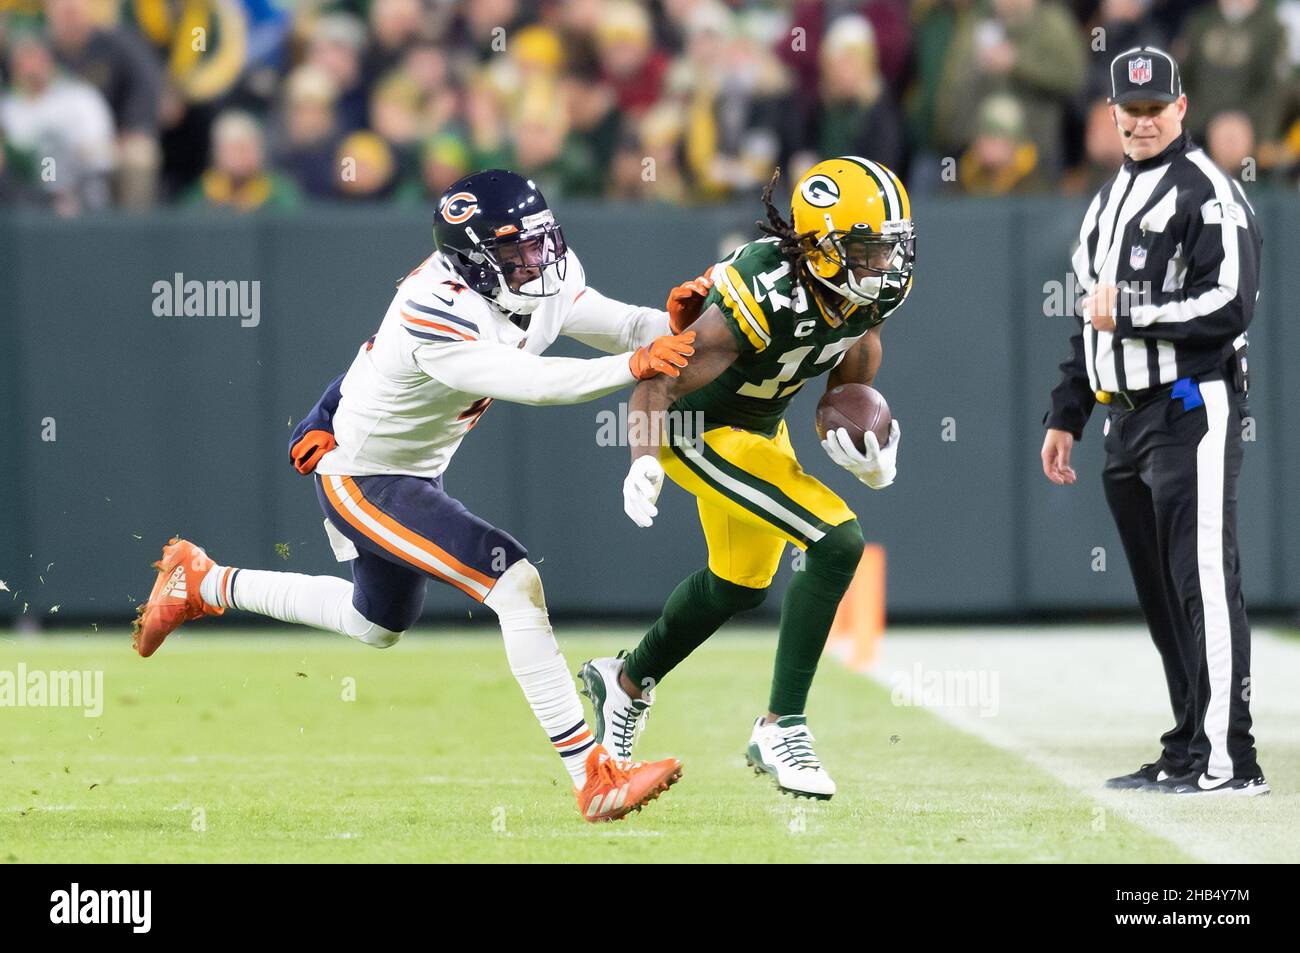 Green Bay, Wisconsin, USA. 12th Dec, 2021. Green Bay Packers wide receiver Davante Adams #17 is pushed out of bounds after making a catch by Chicago Bears free safety Eddie Jackson #4 during NFL football game between the Chicago Bears and the Green Bay Packers at Lambeau Field in Green Bay, Wisconsin. Packers defeated Bears 45-30. Kirsten Schmitt/CSM/Alamy Live News Stock Photo